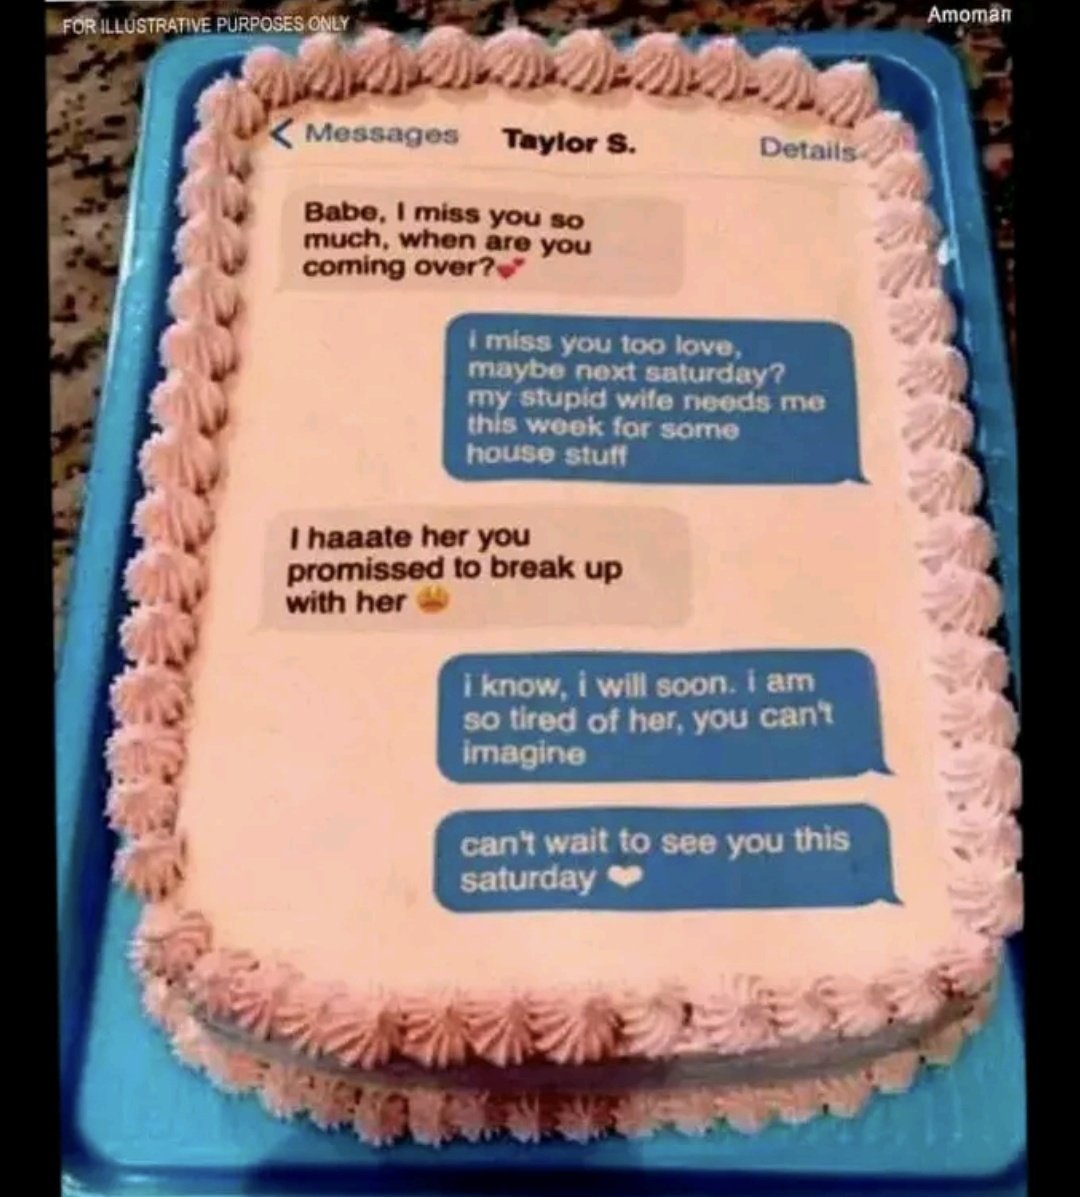 A wife makes a birthday cake for her husband using messages between him and his side chicks. What would you do as a husband?